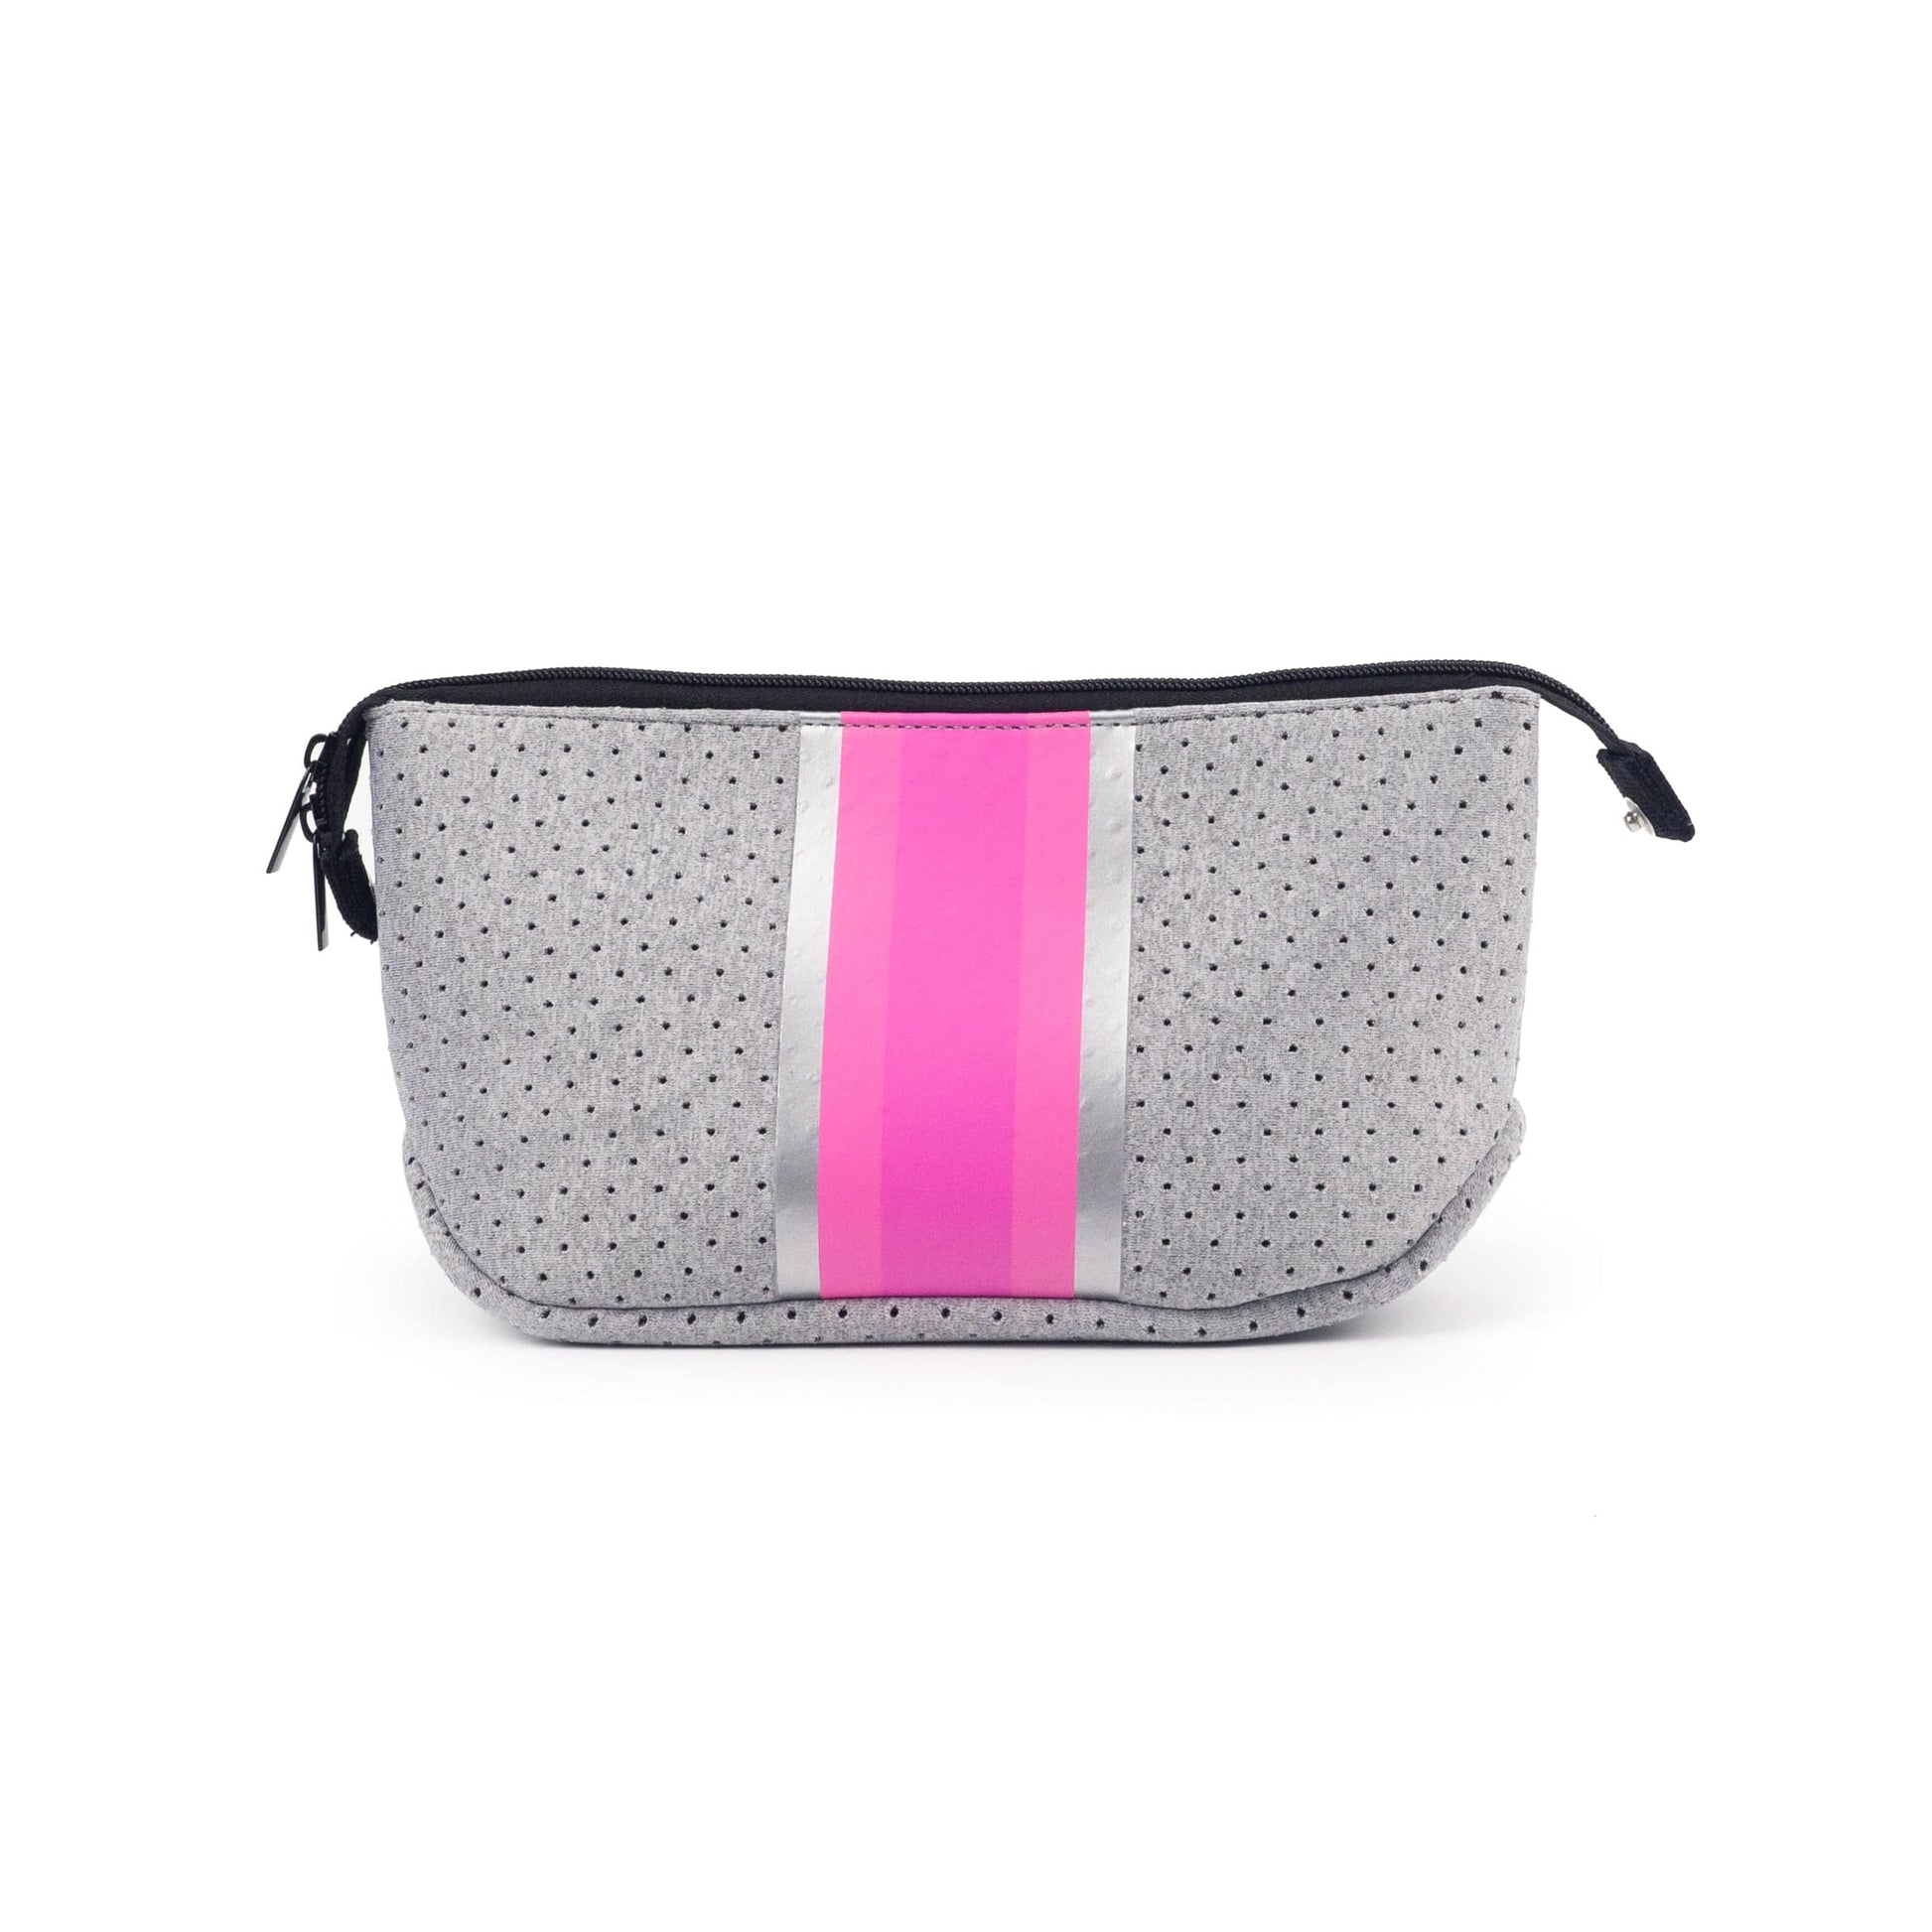 Neoprene makeup bag in gray with pink stripe and zipper top closure 